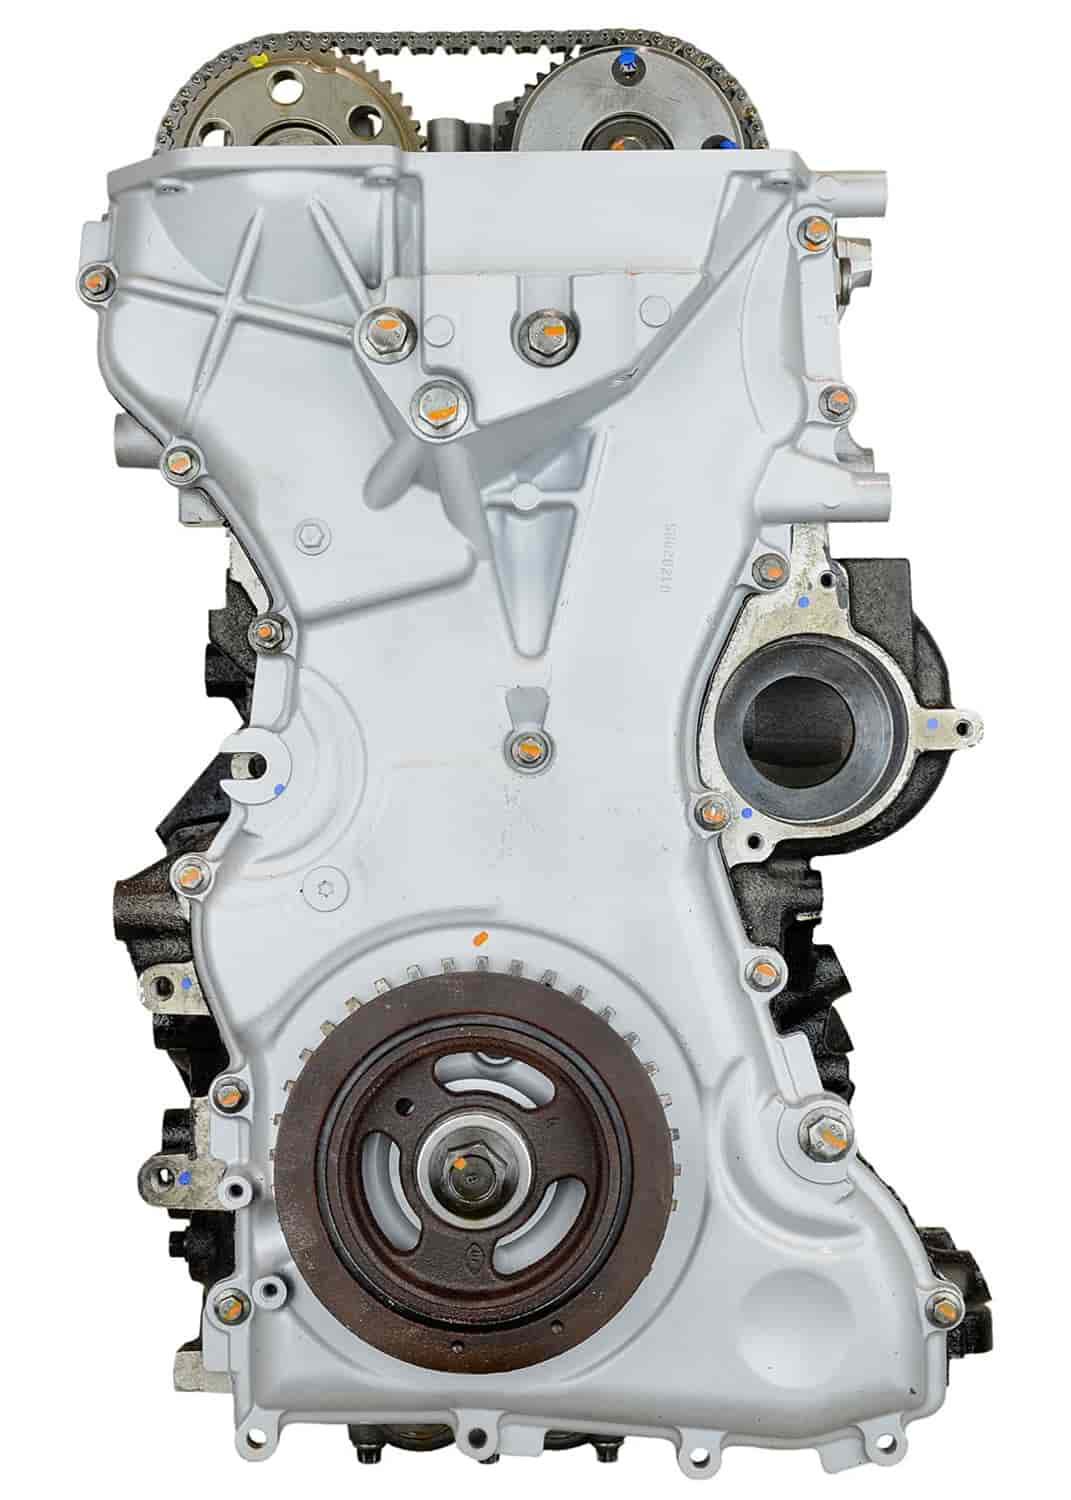 Remanufactured Crate Engine for 2005 Mazda 6 with 2.3L L4